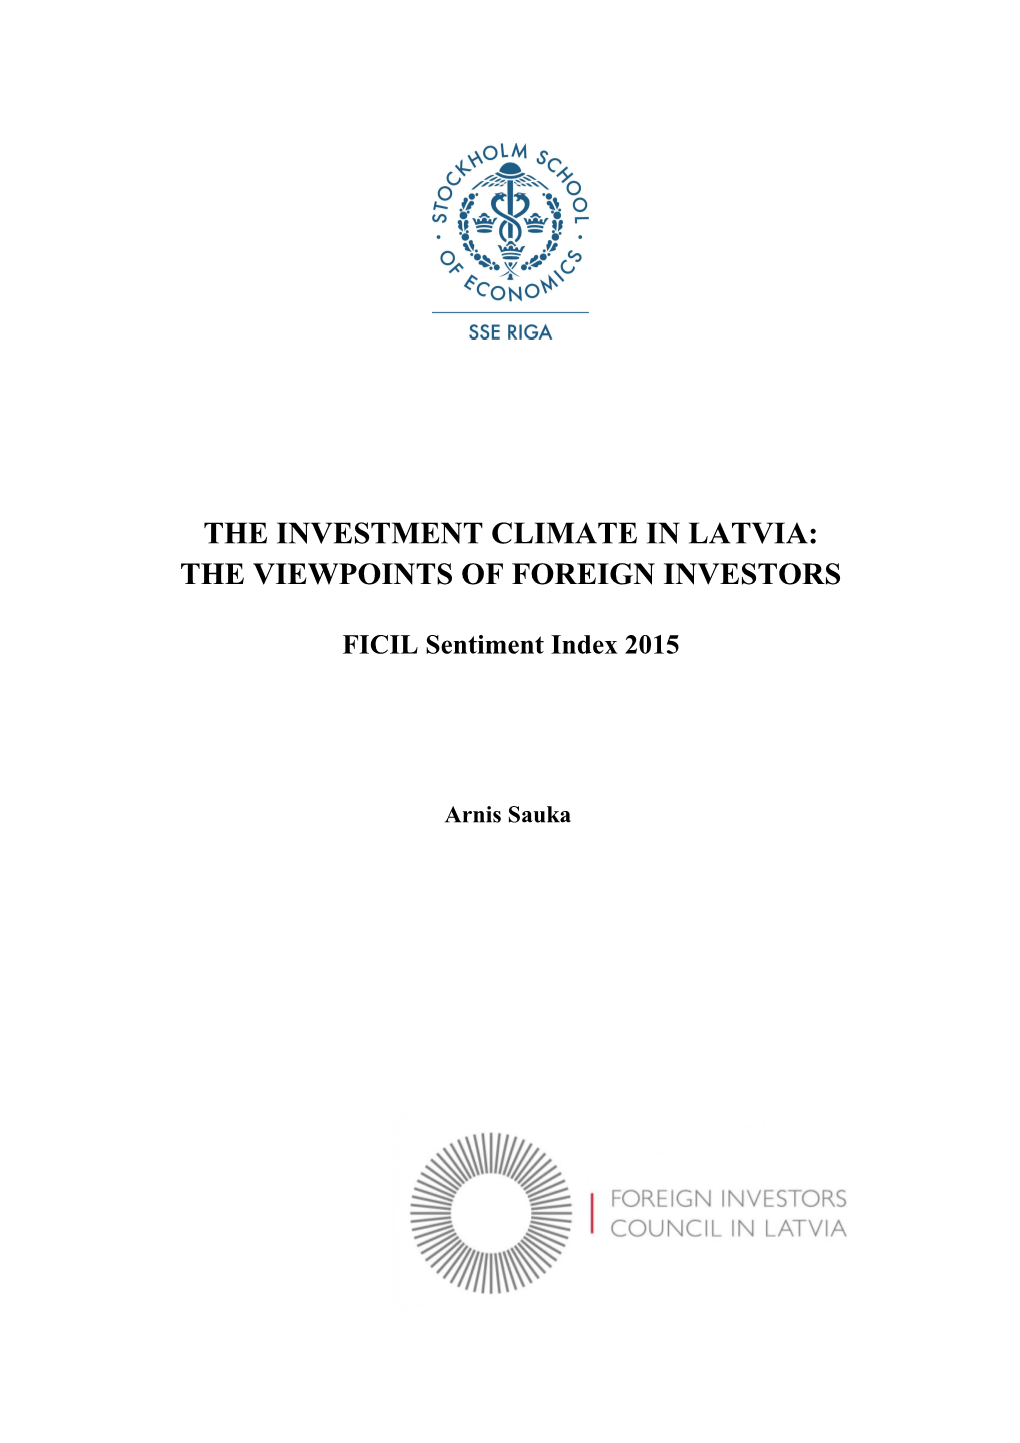 The Investment Climate in Latvia